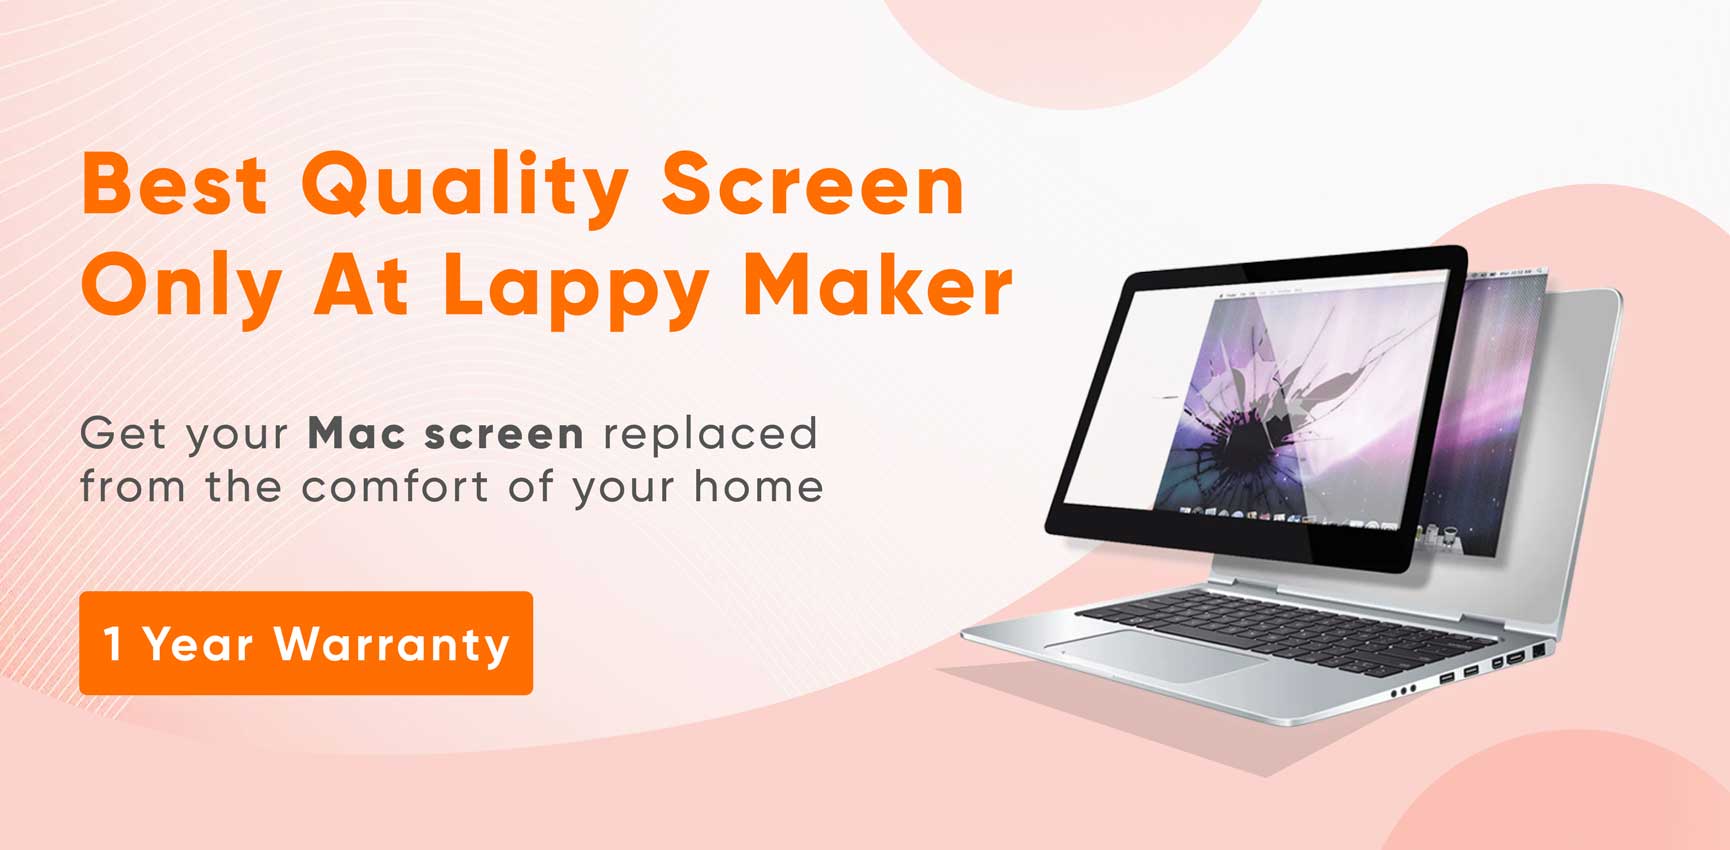 Best Quality Screen Only At Lappy Maker